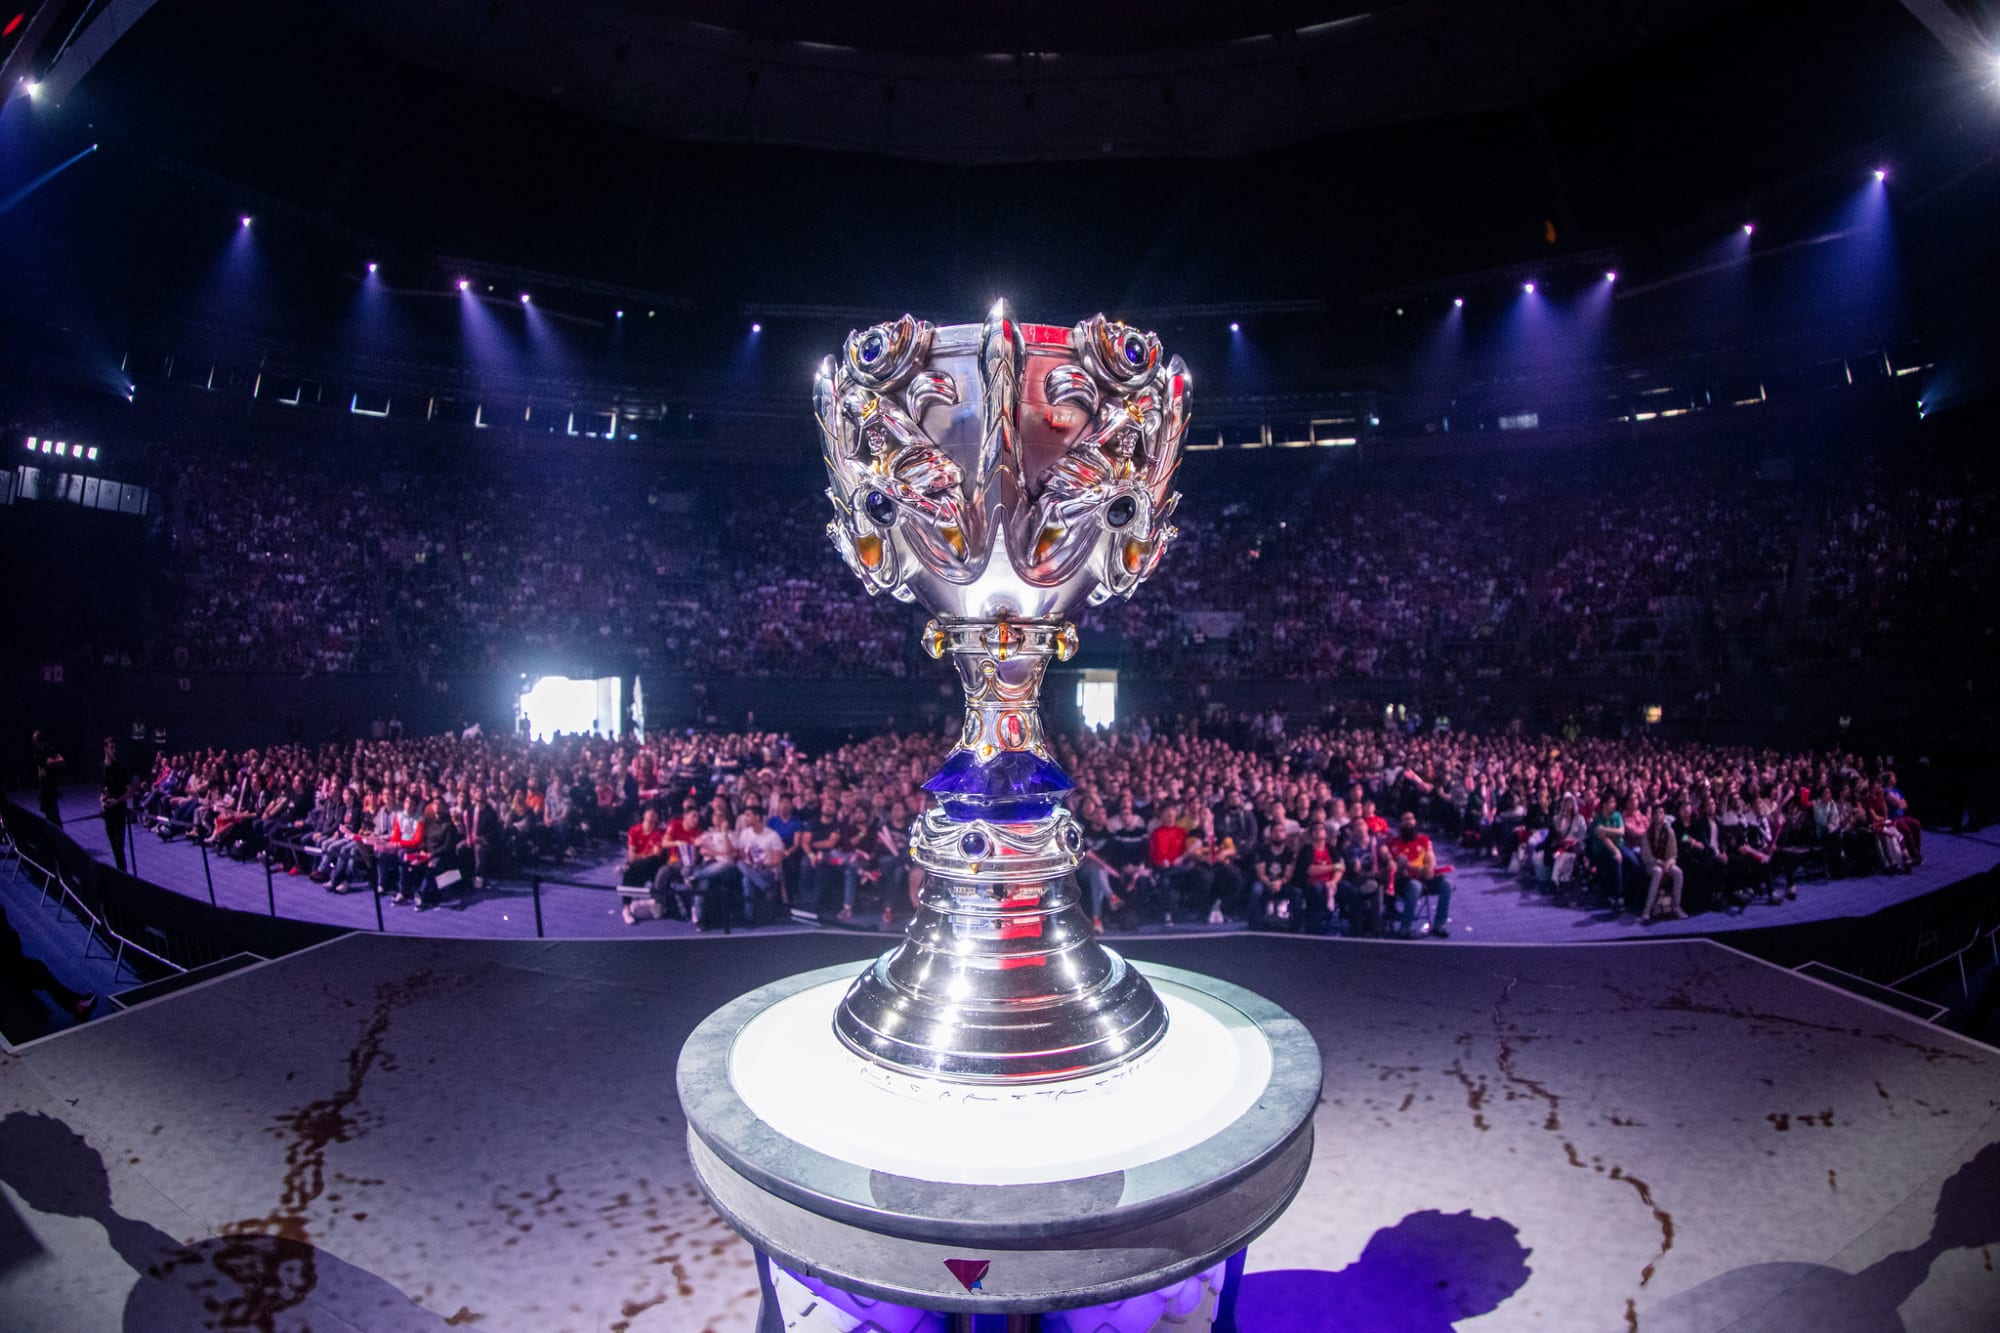 Worlds Schedule Every Game in the 2020 World Championship